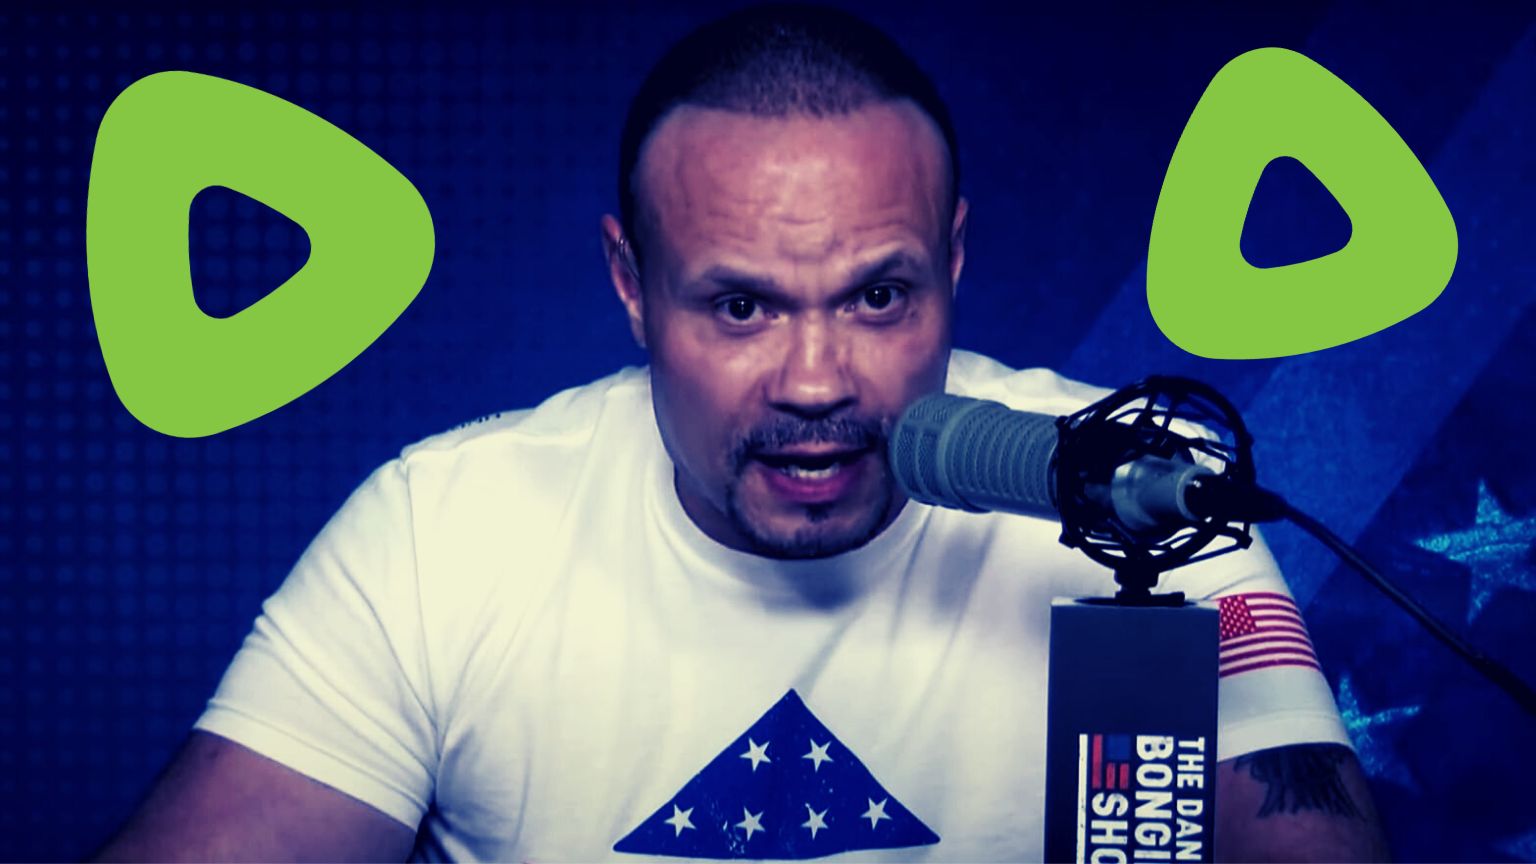 Dan Bongino Reaches Record-Breaking 3 Million Rumble Subscribers, Extends Show Length, In a Win For Free Speech in Digital Media